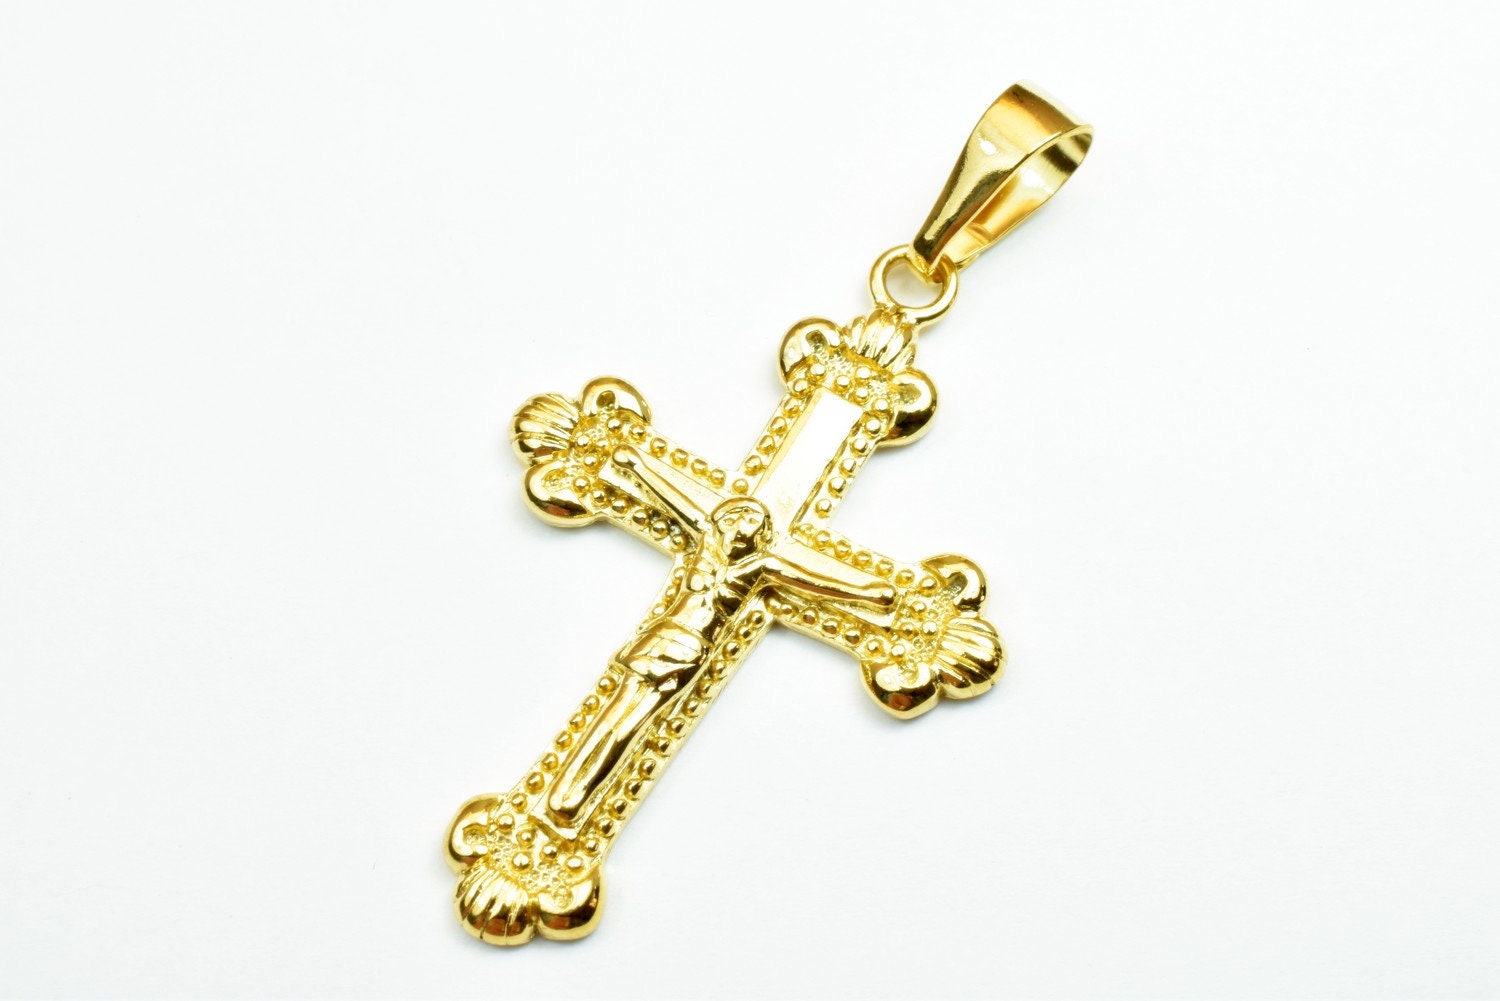 18K as Gold Filled* Cross Pendants Size 47x31mm, Christian Religious Cross Charm, First Communion Baby Baptism For Jewelry Making